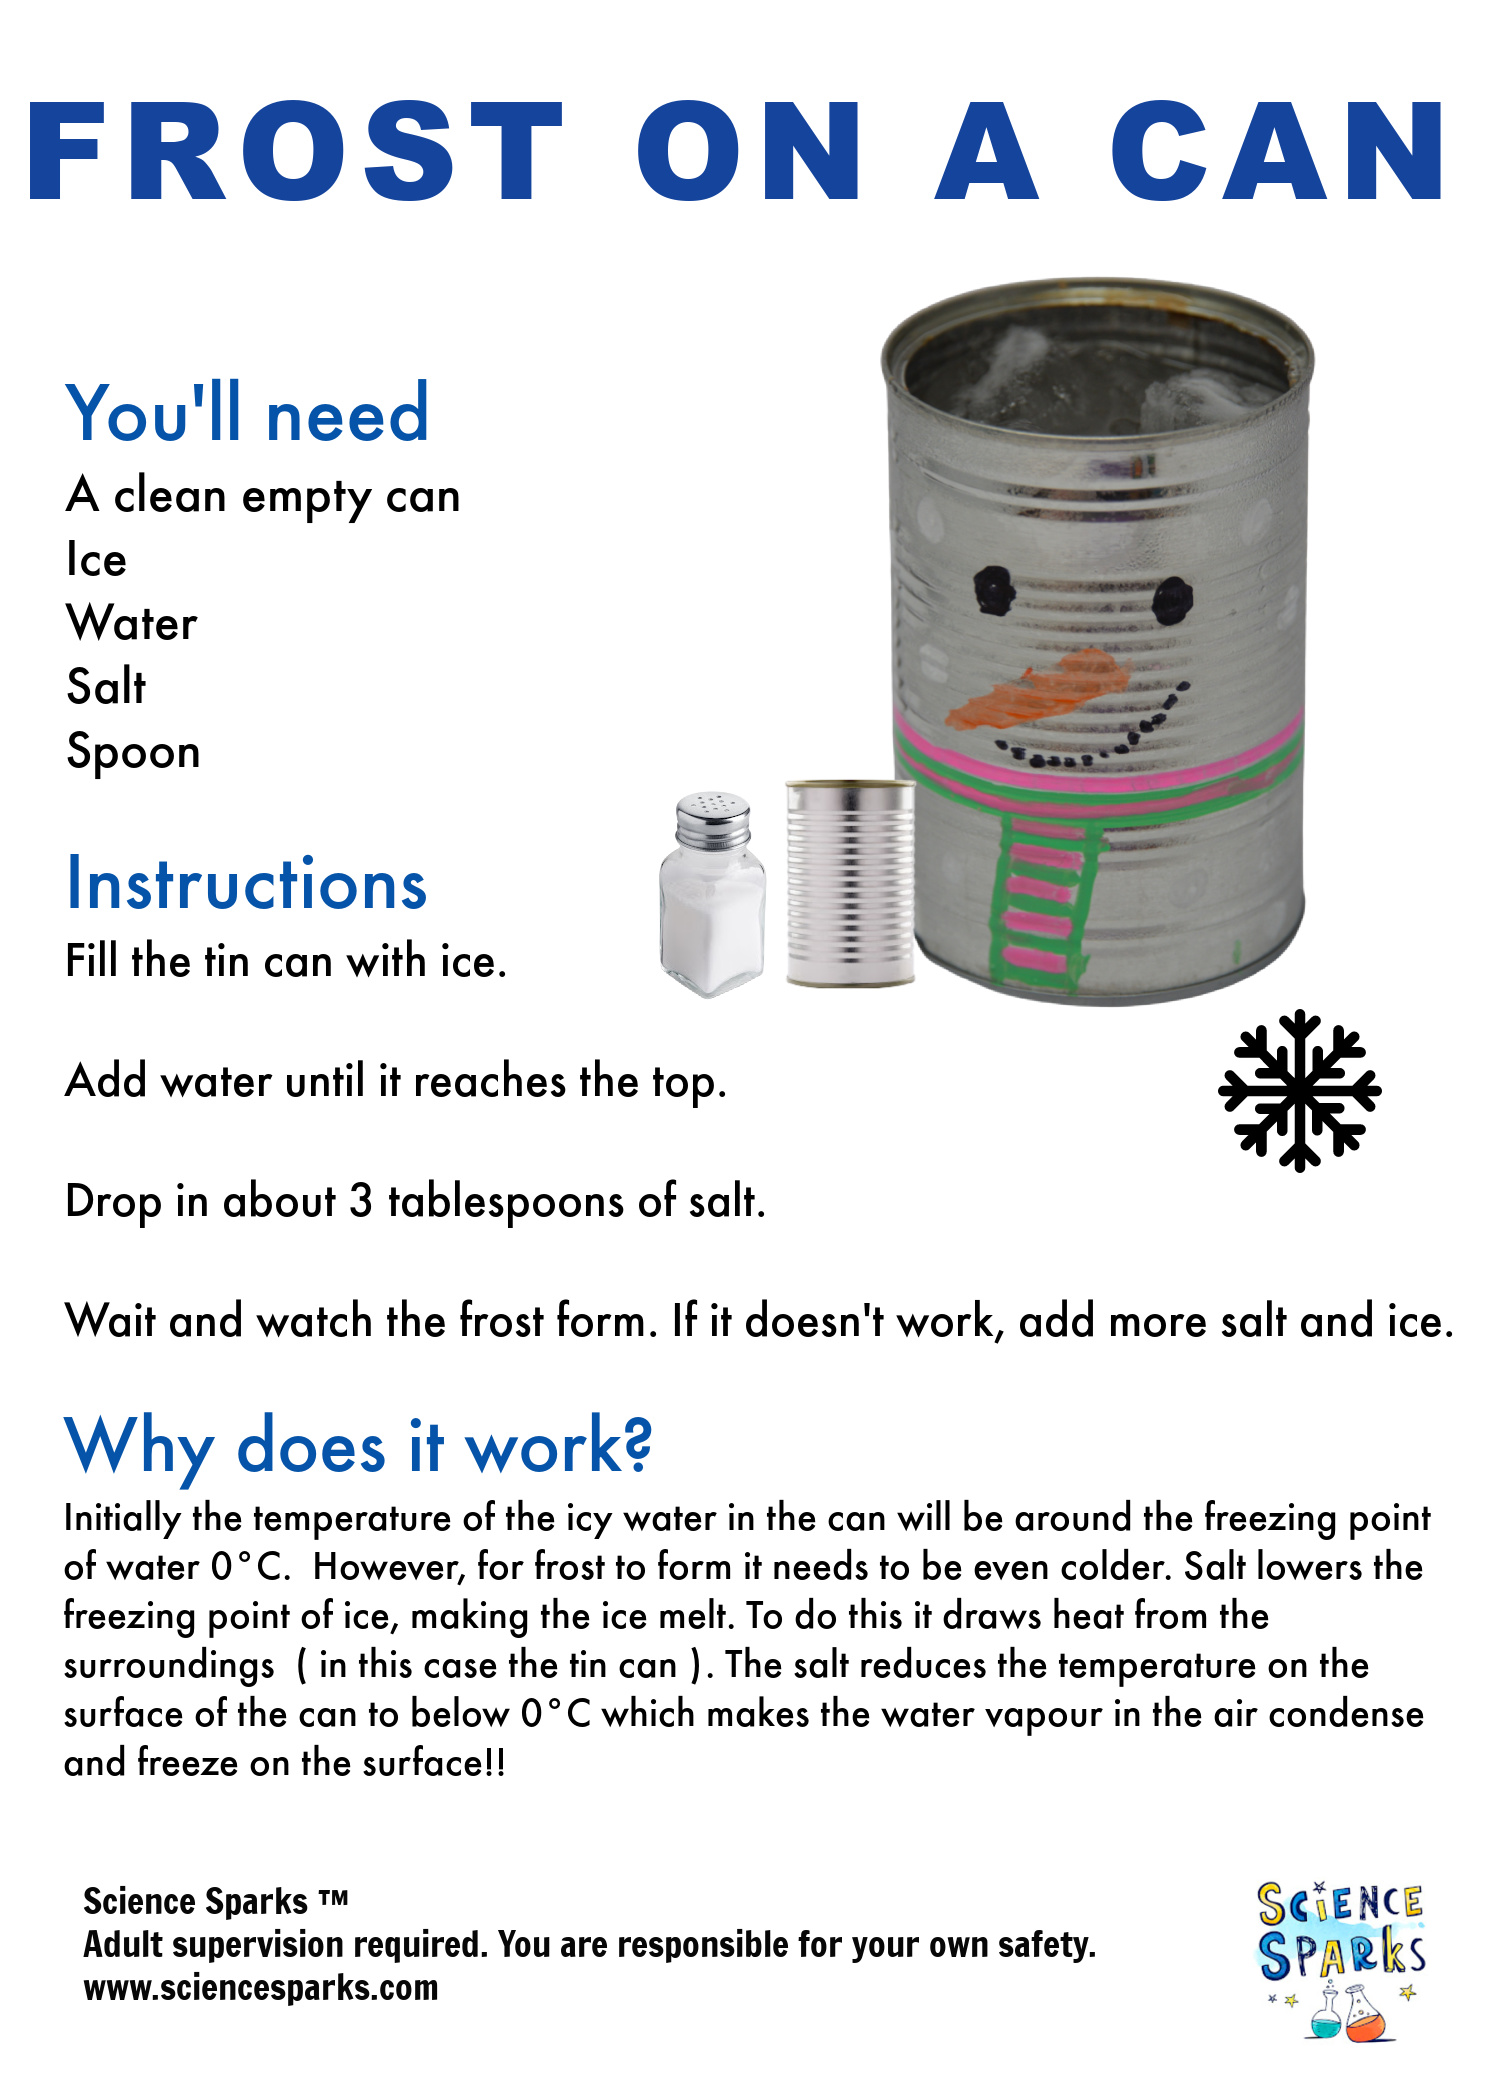 Instructions for a frost on a Can science experiment. Add ice and salt to make frost.